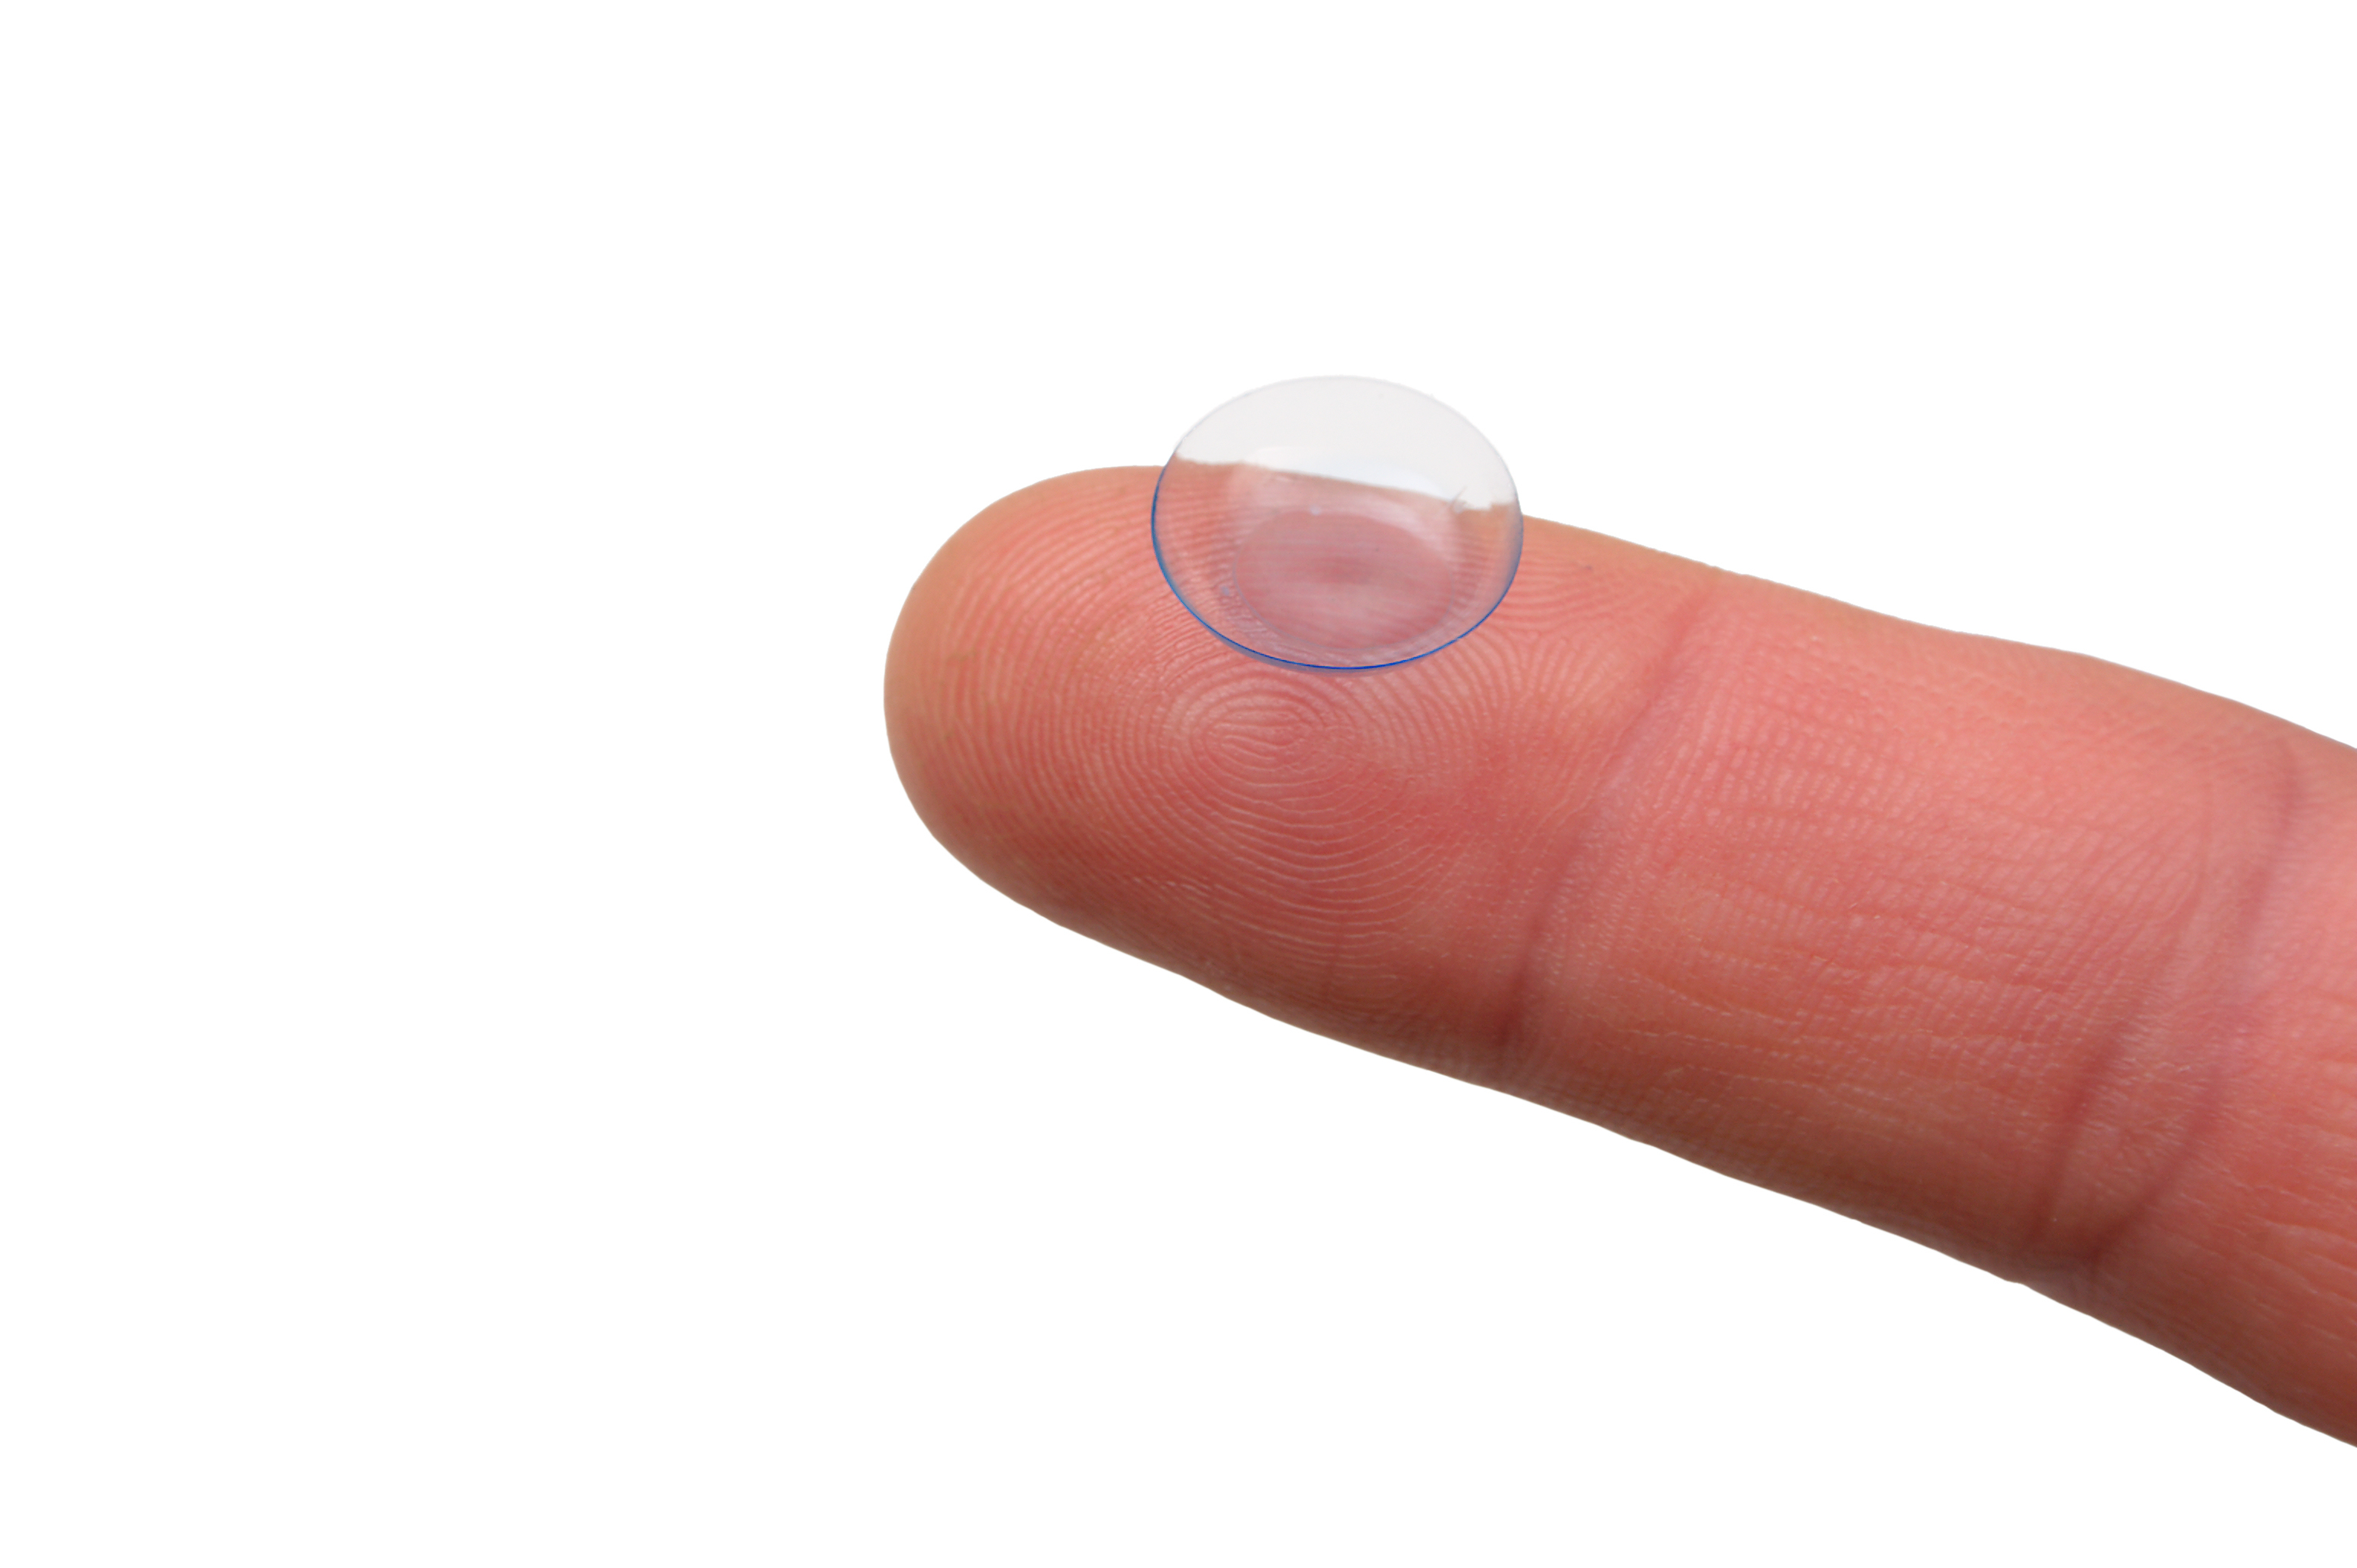 monthly contact lenses